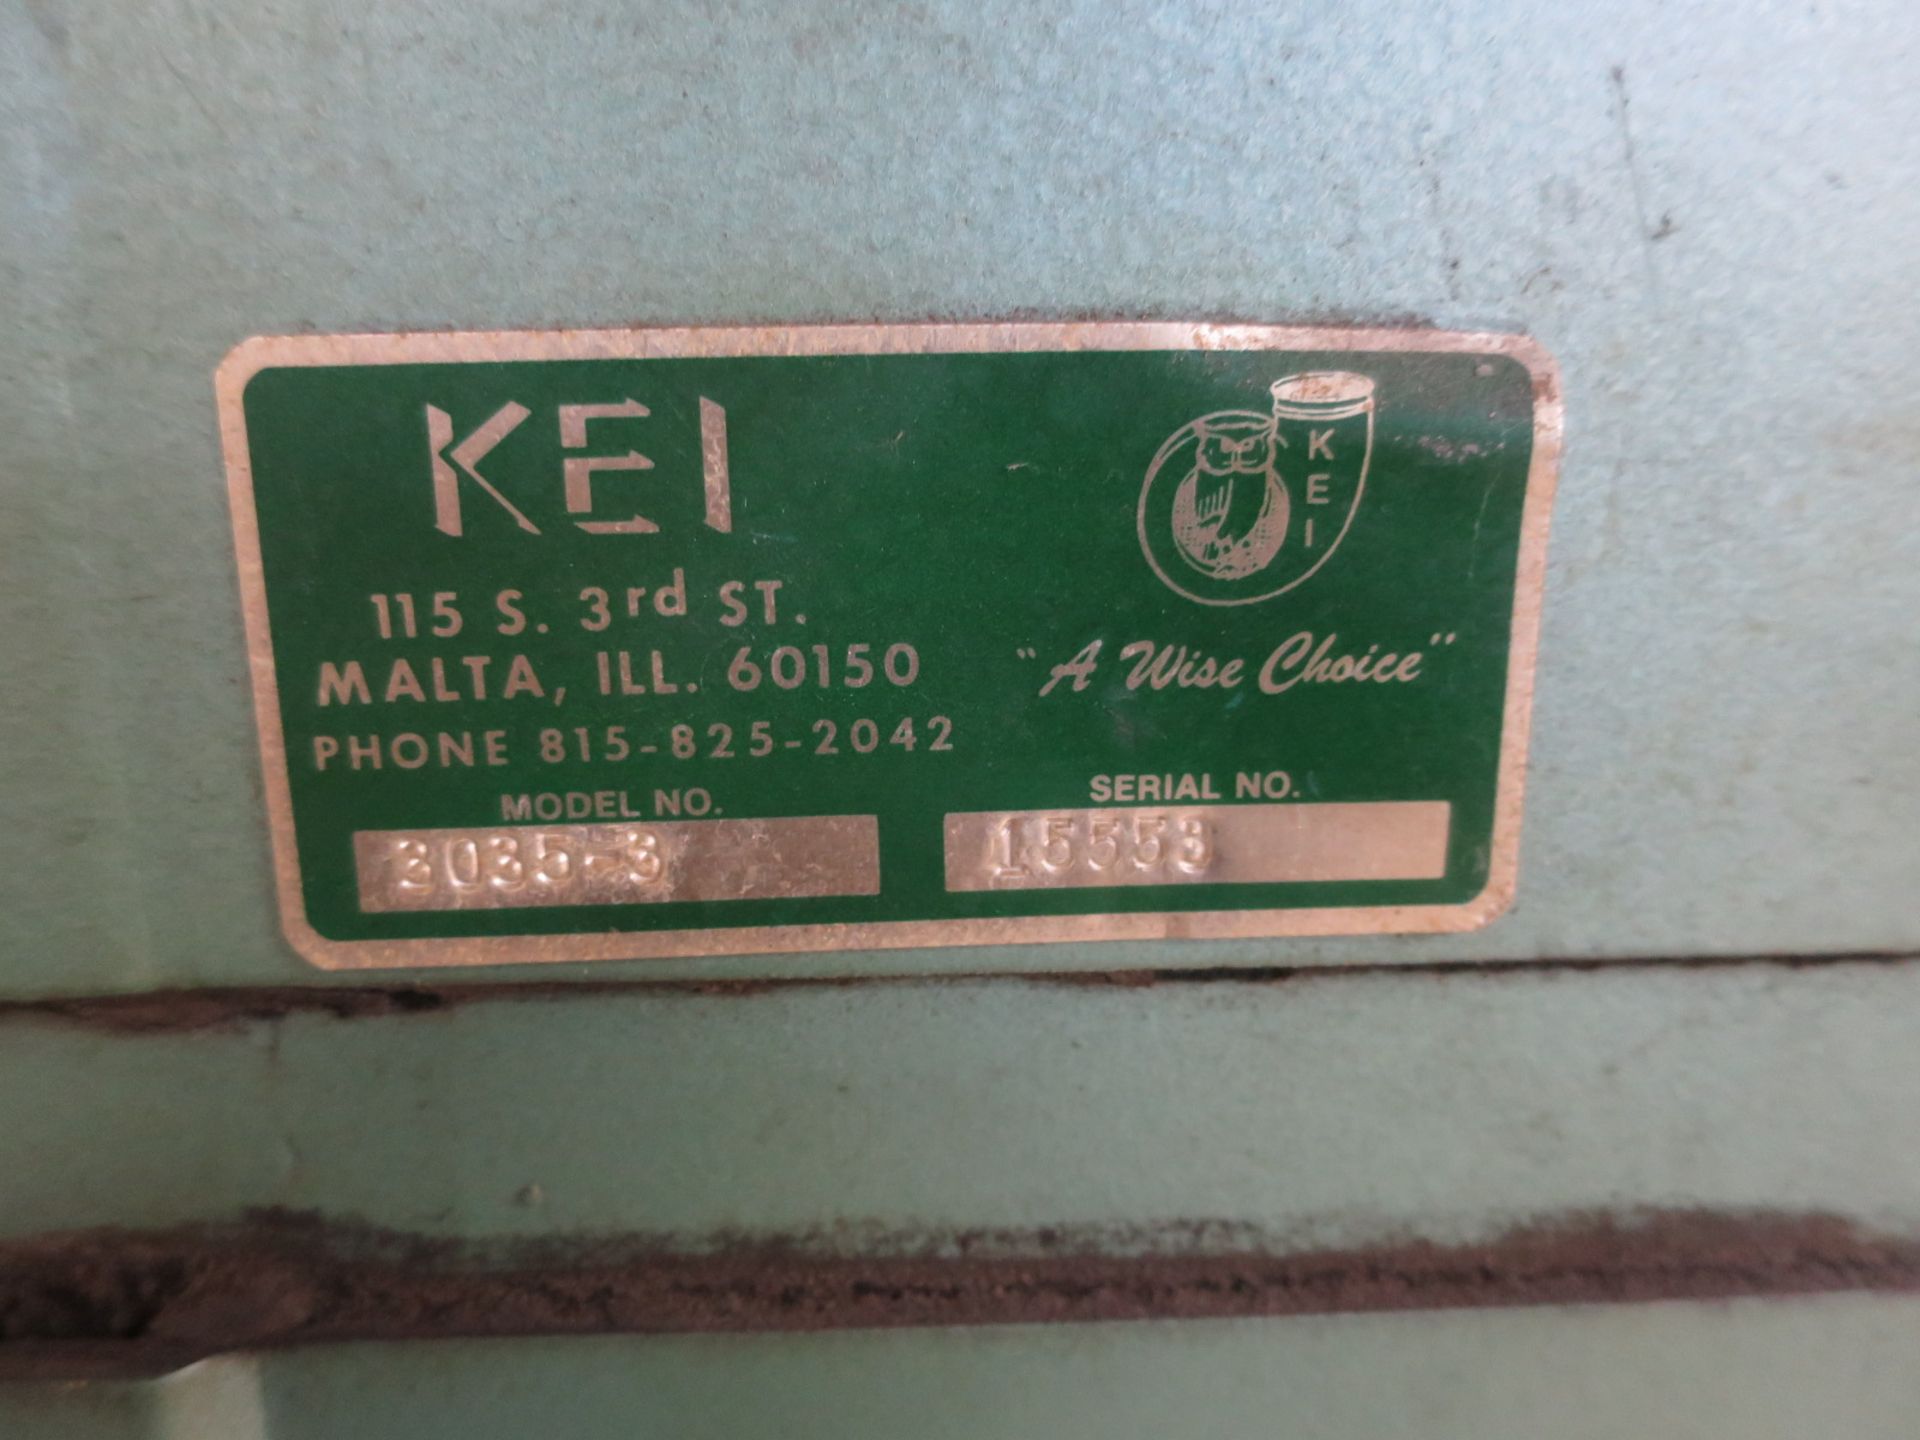 Kei Model 3035-3 Dust Collector, Sn 15553 - Image 2 of 3